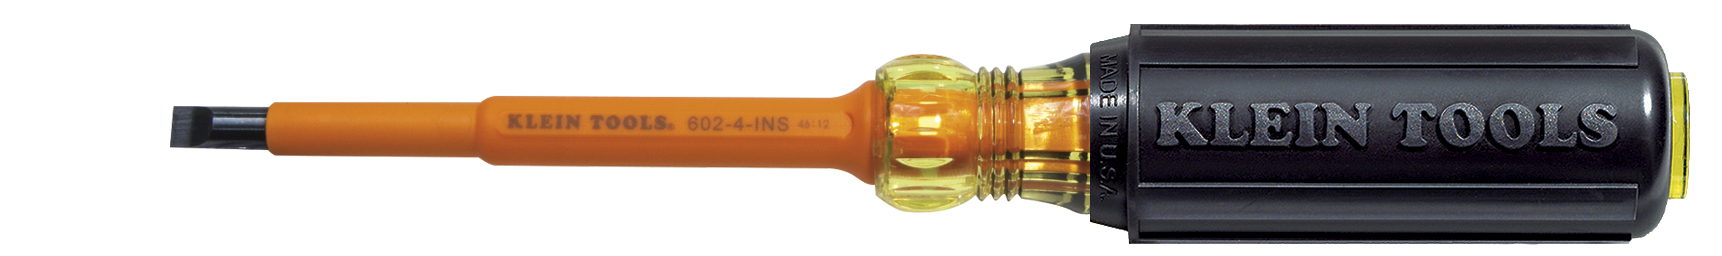 1/4-Inch Cabinet Tip Insulated Screwdriver, 4-Inch, 1000V rated for safety